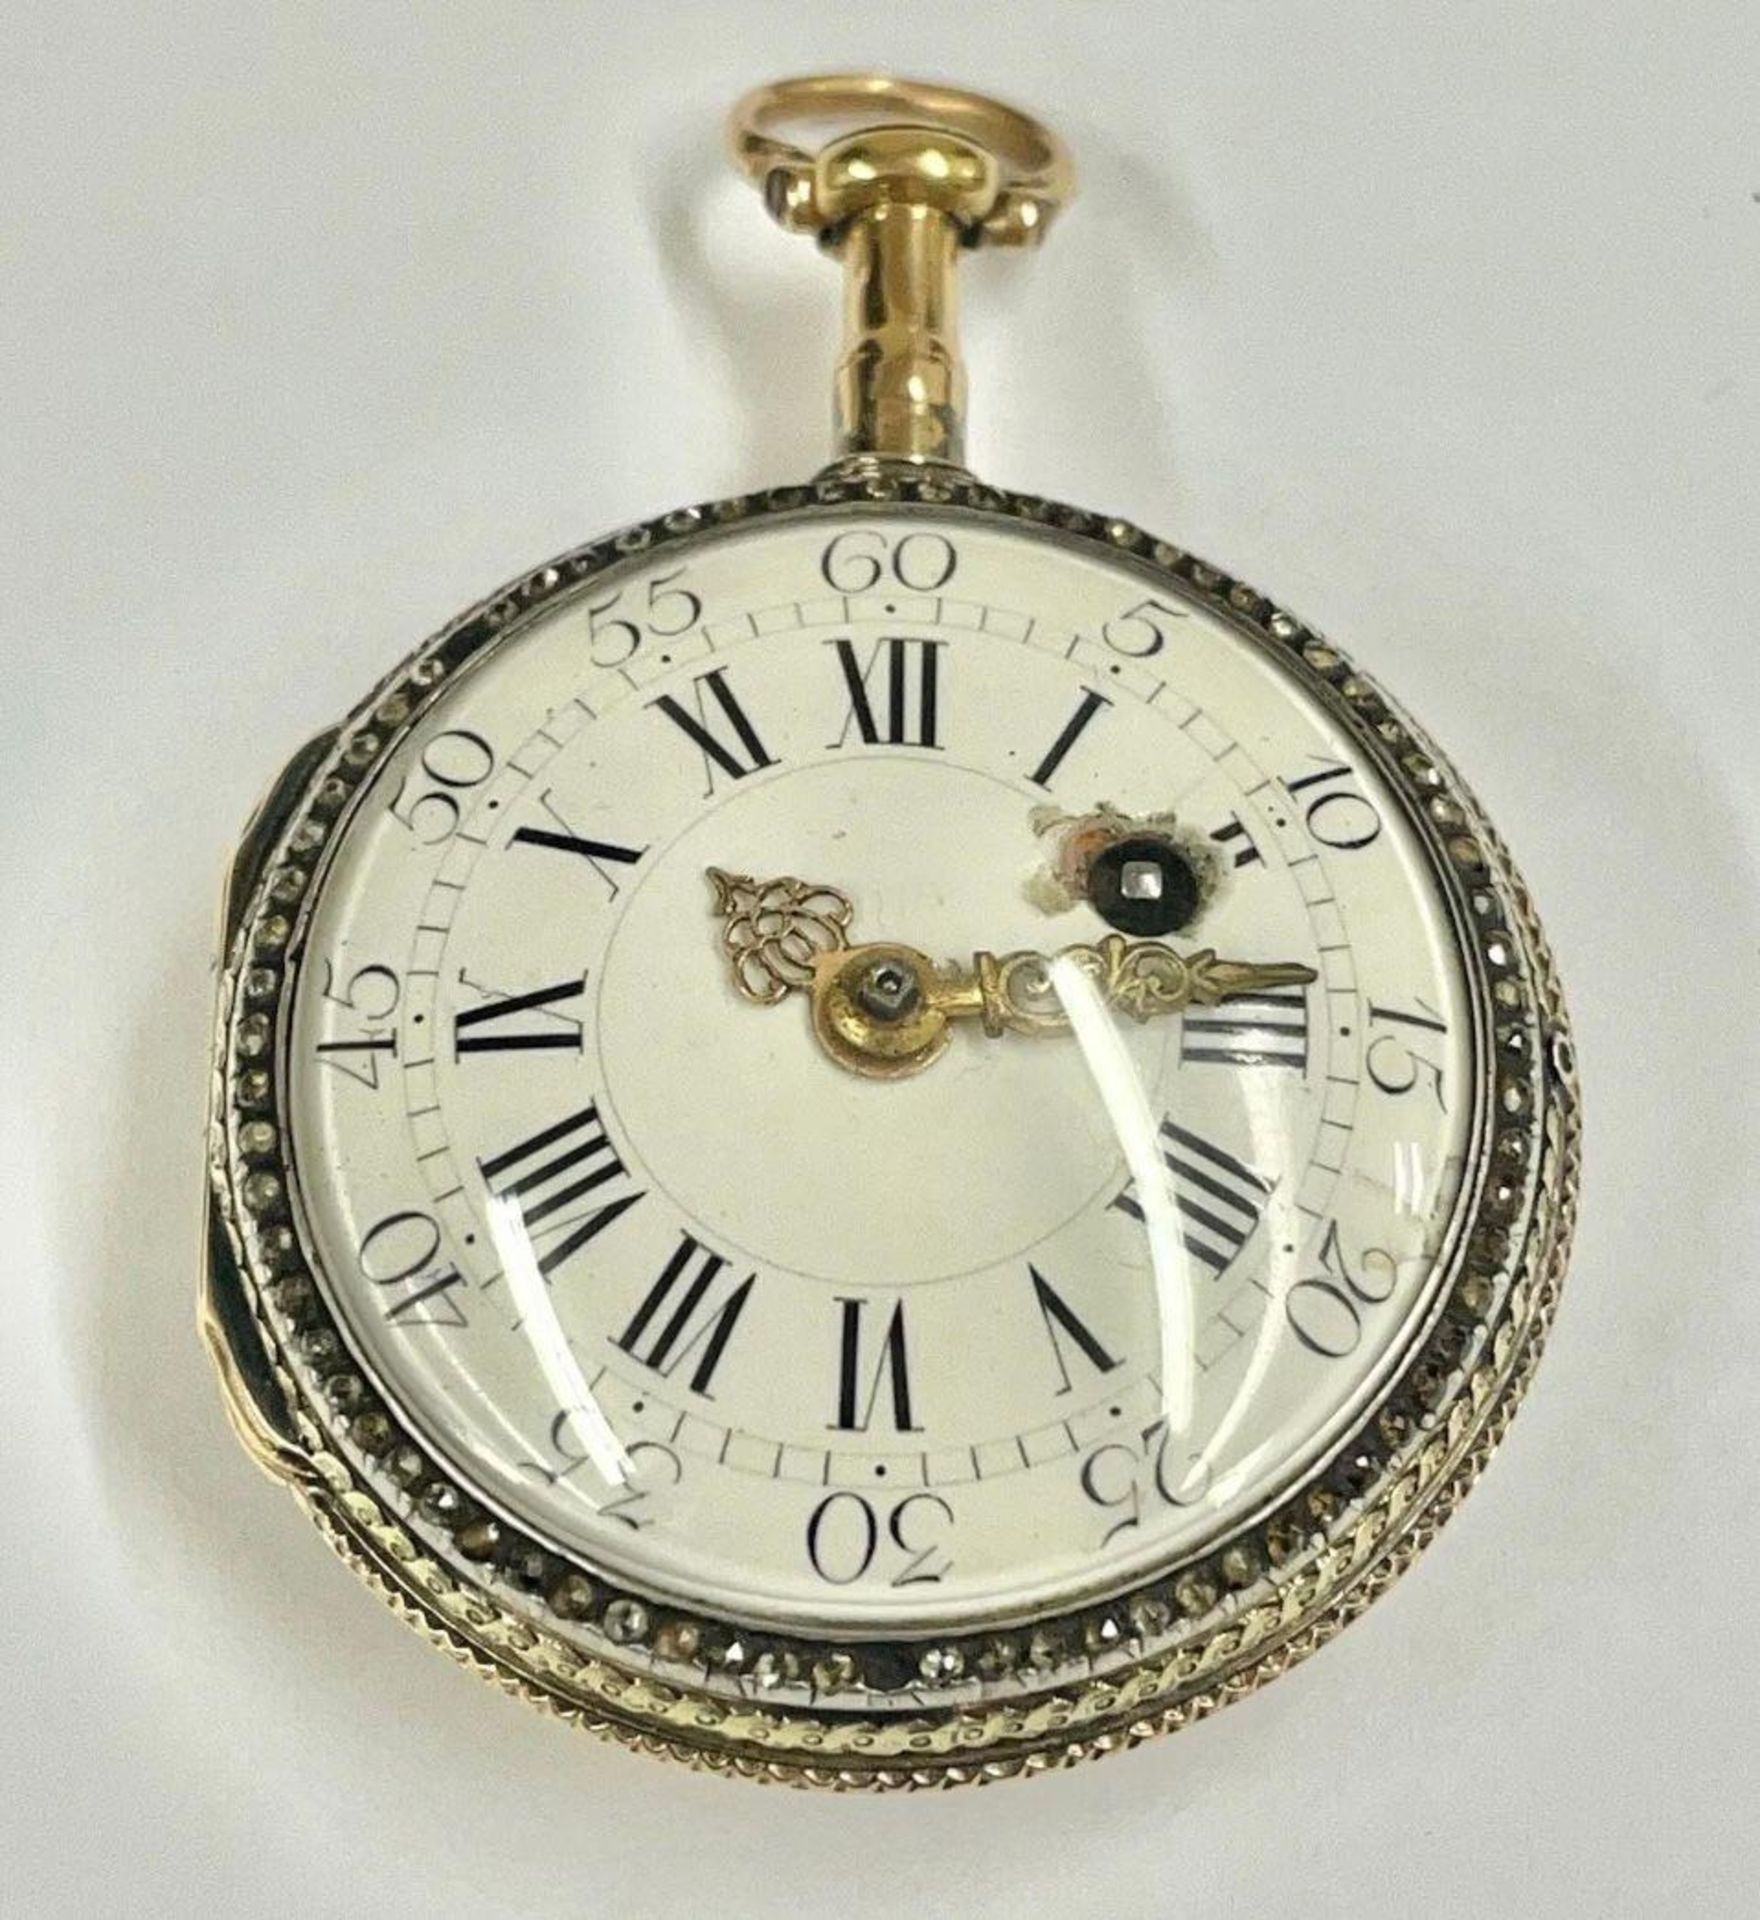 18ct gold verge fusee pocket watch , Good balance staff but wound tight needs service. - Image 3 of 6